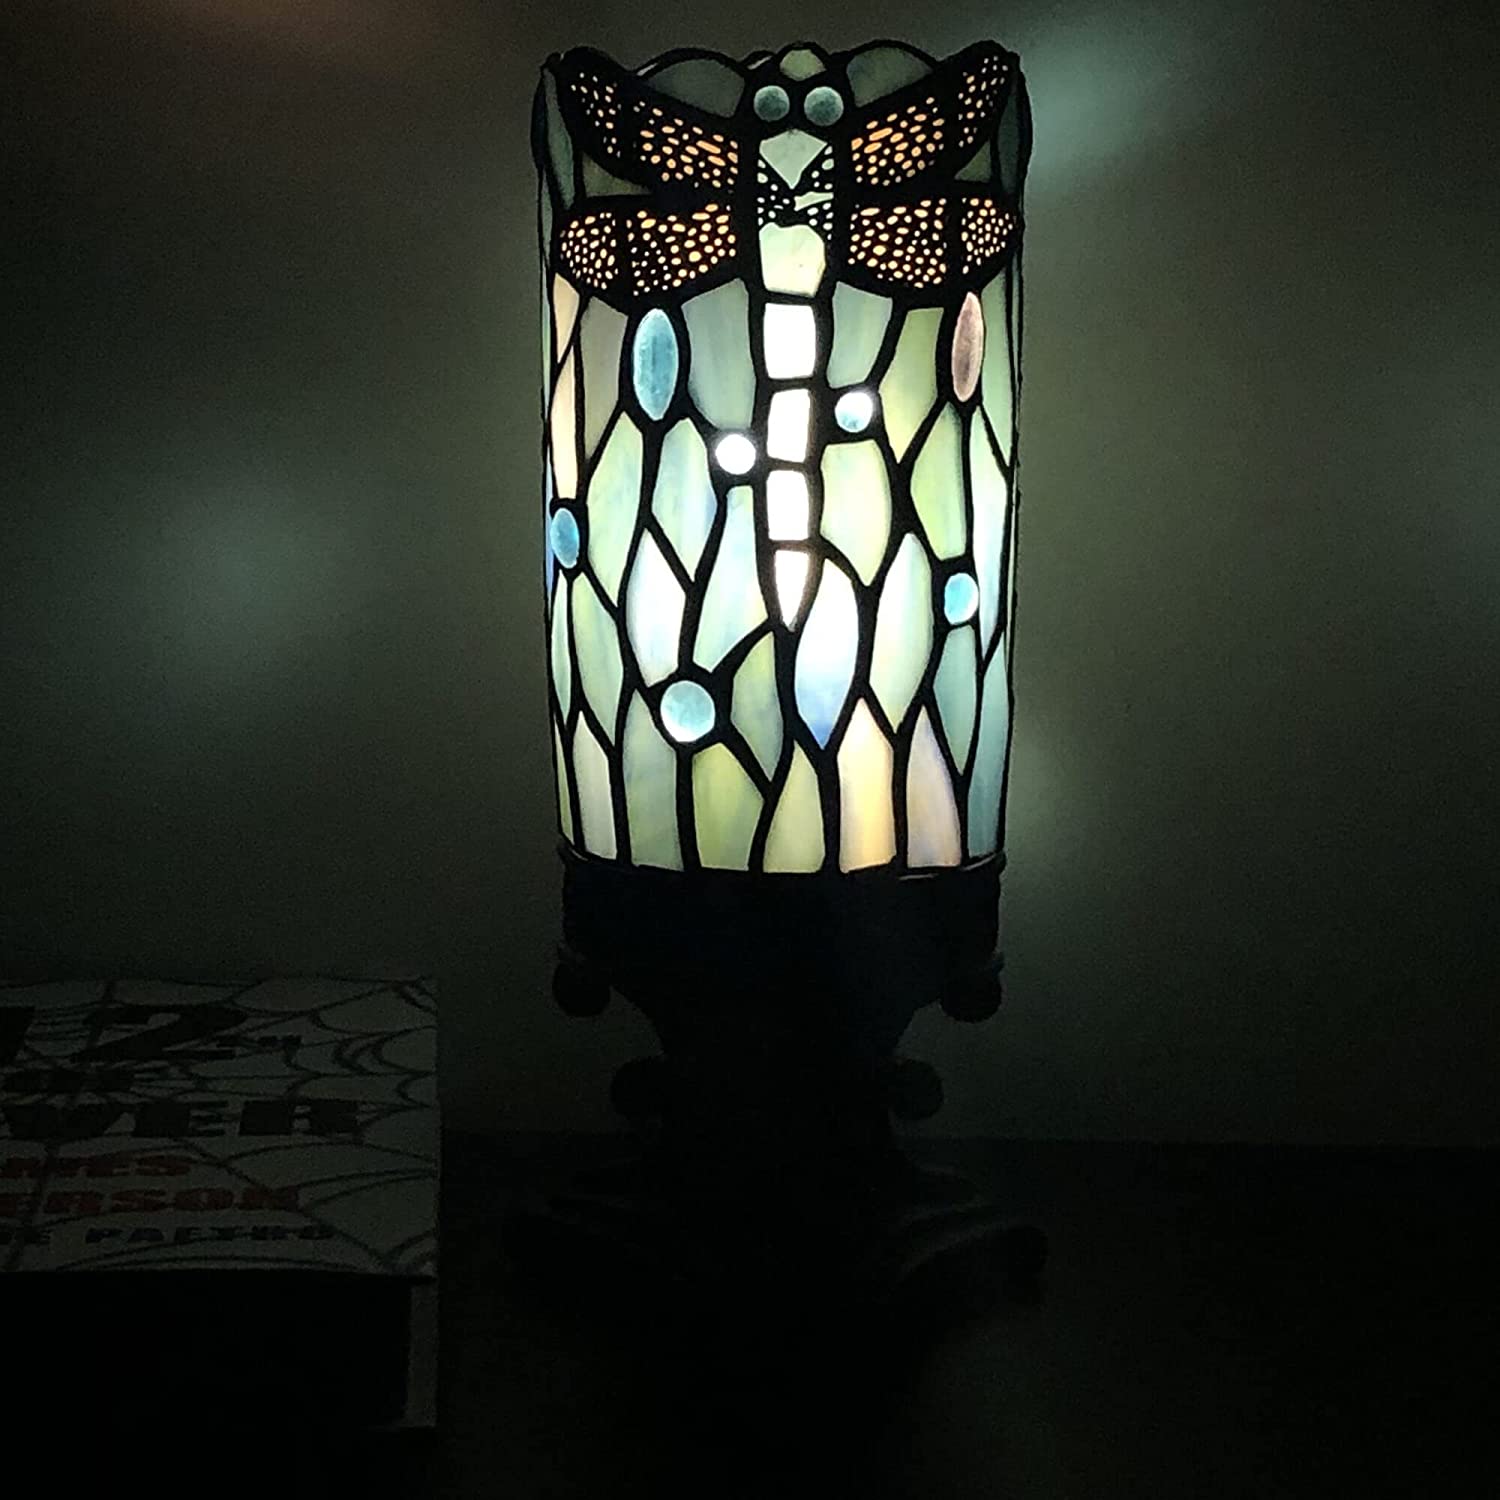 WERFACTORY Small Tiffany Lamp Mini Stained Glass Table Lamp W4H10 Inch Sea Blue Dragonfly Style Desk Night Light Luxury Candle Type Lamp for Bedroom Living Room